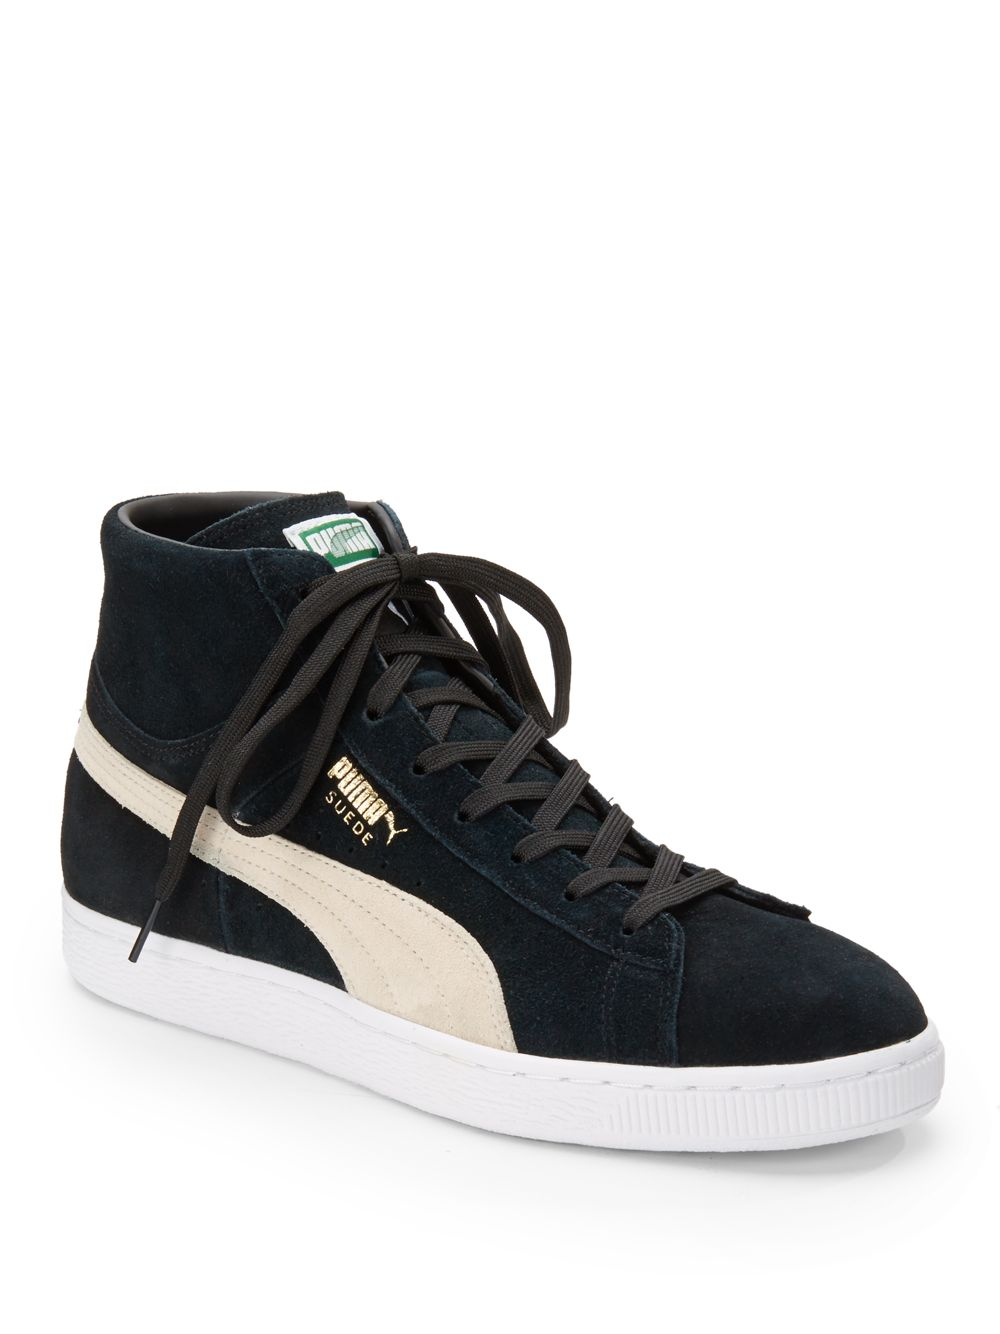 Puma Suede Mid Classic Sneakers in Black for Men | Lyst